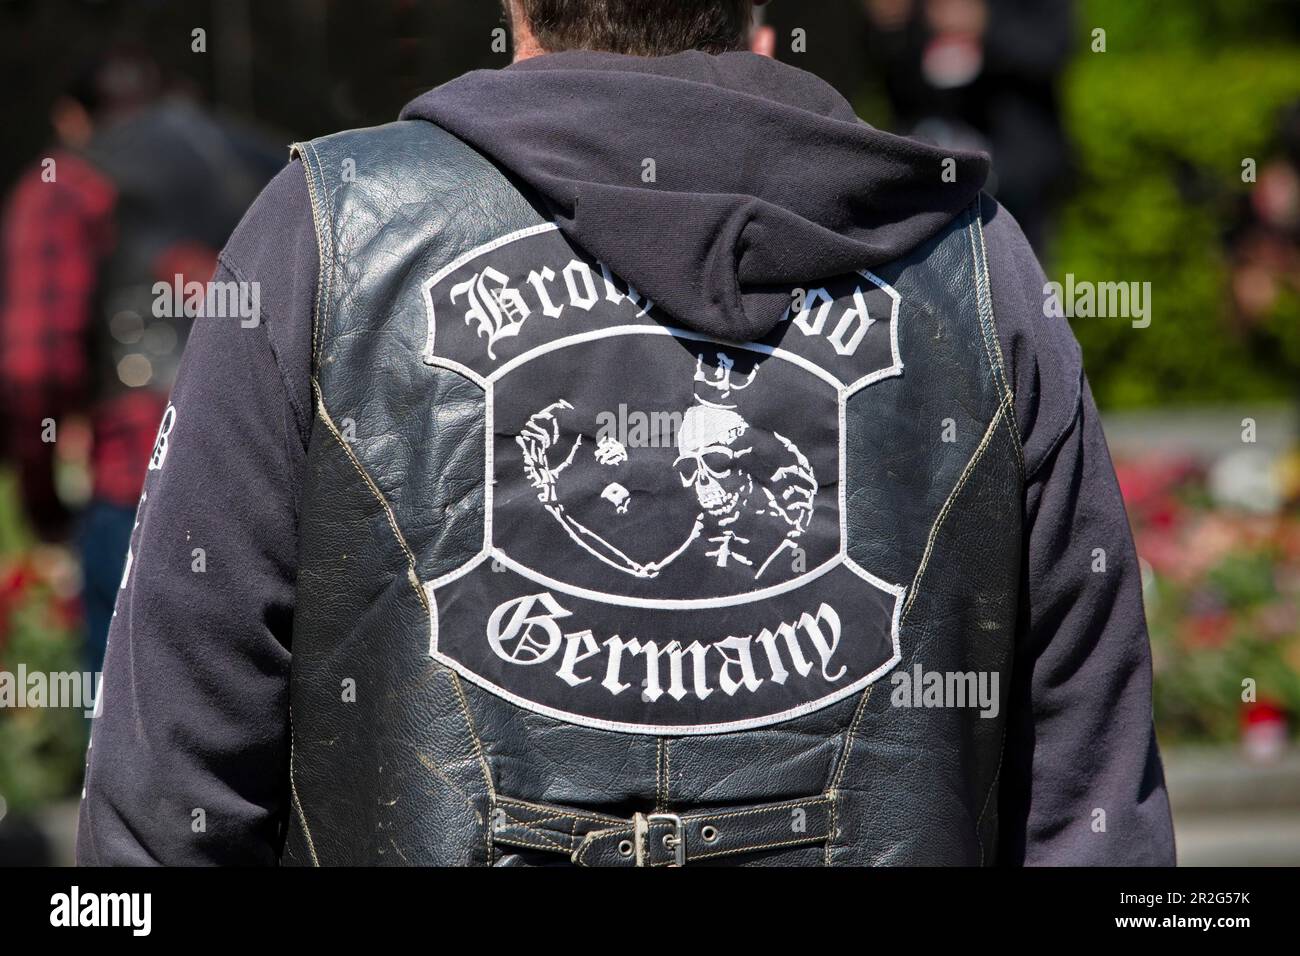 Back of a cowl from the rocker group Brotherhood Gemany, Berlin, Germany Stock Photo